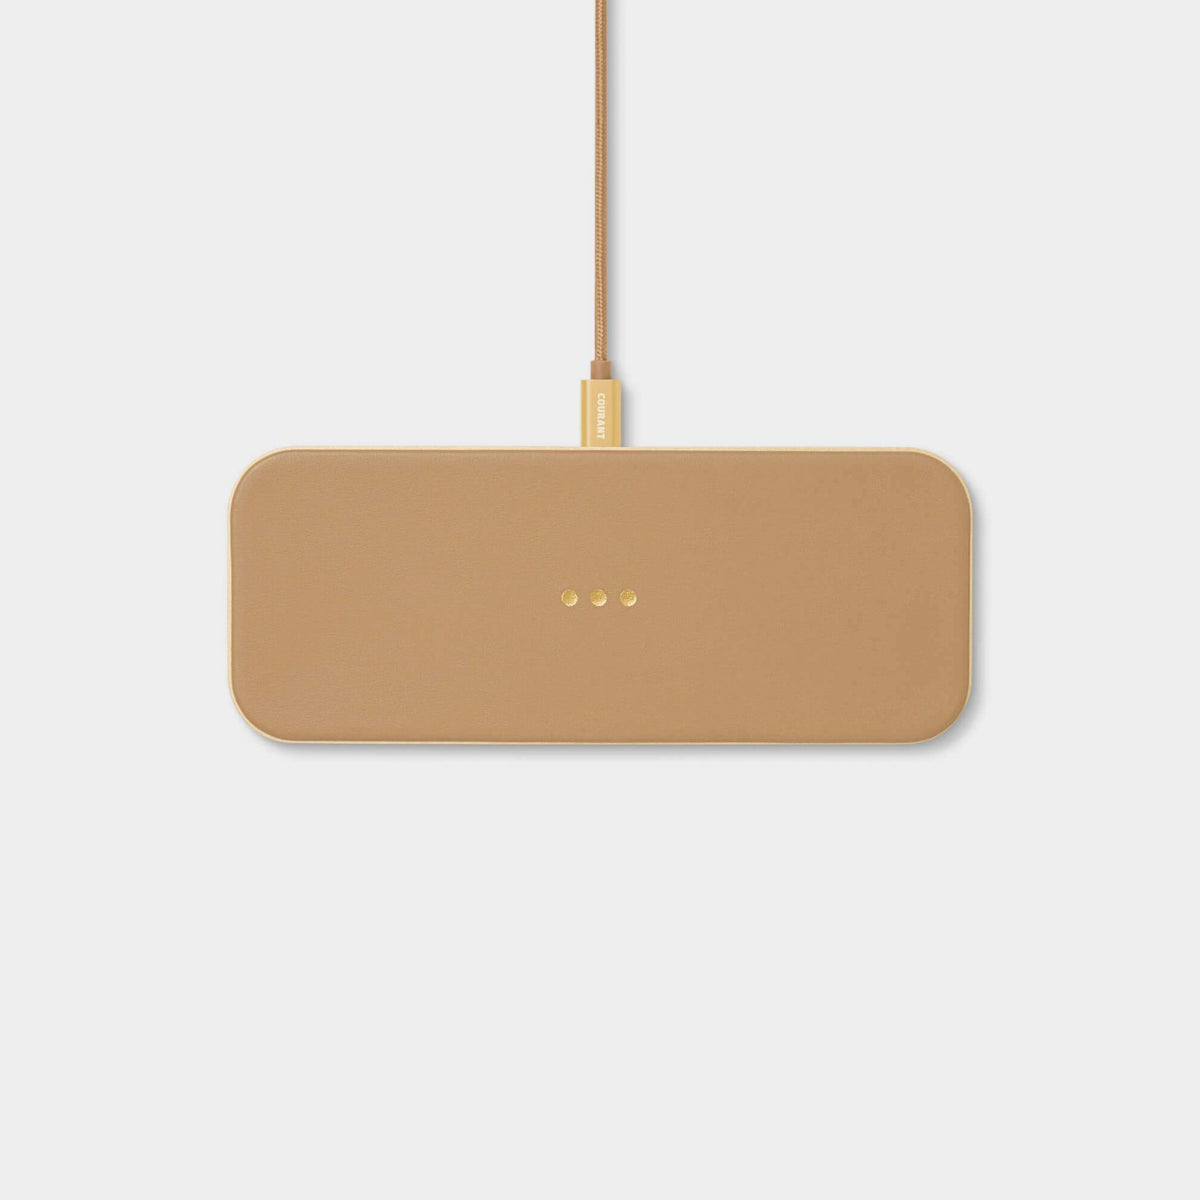 Catch 2 - Fast Wireless Phone Charger in Cortado